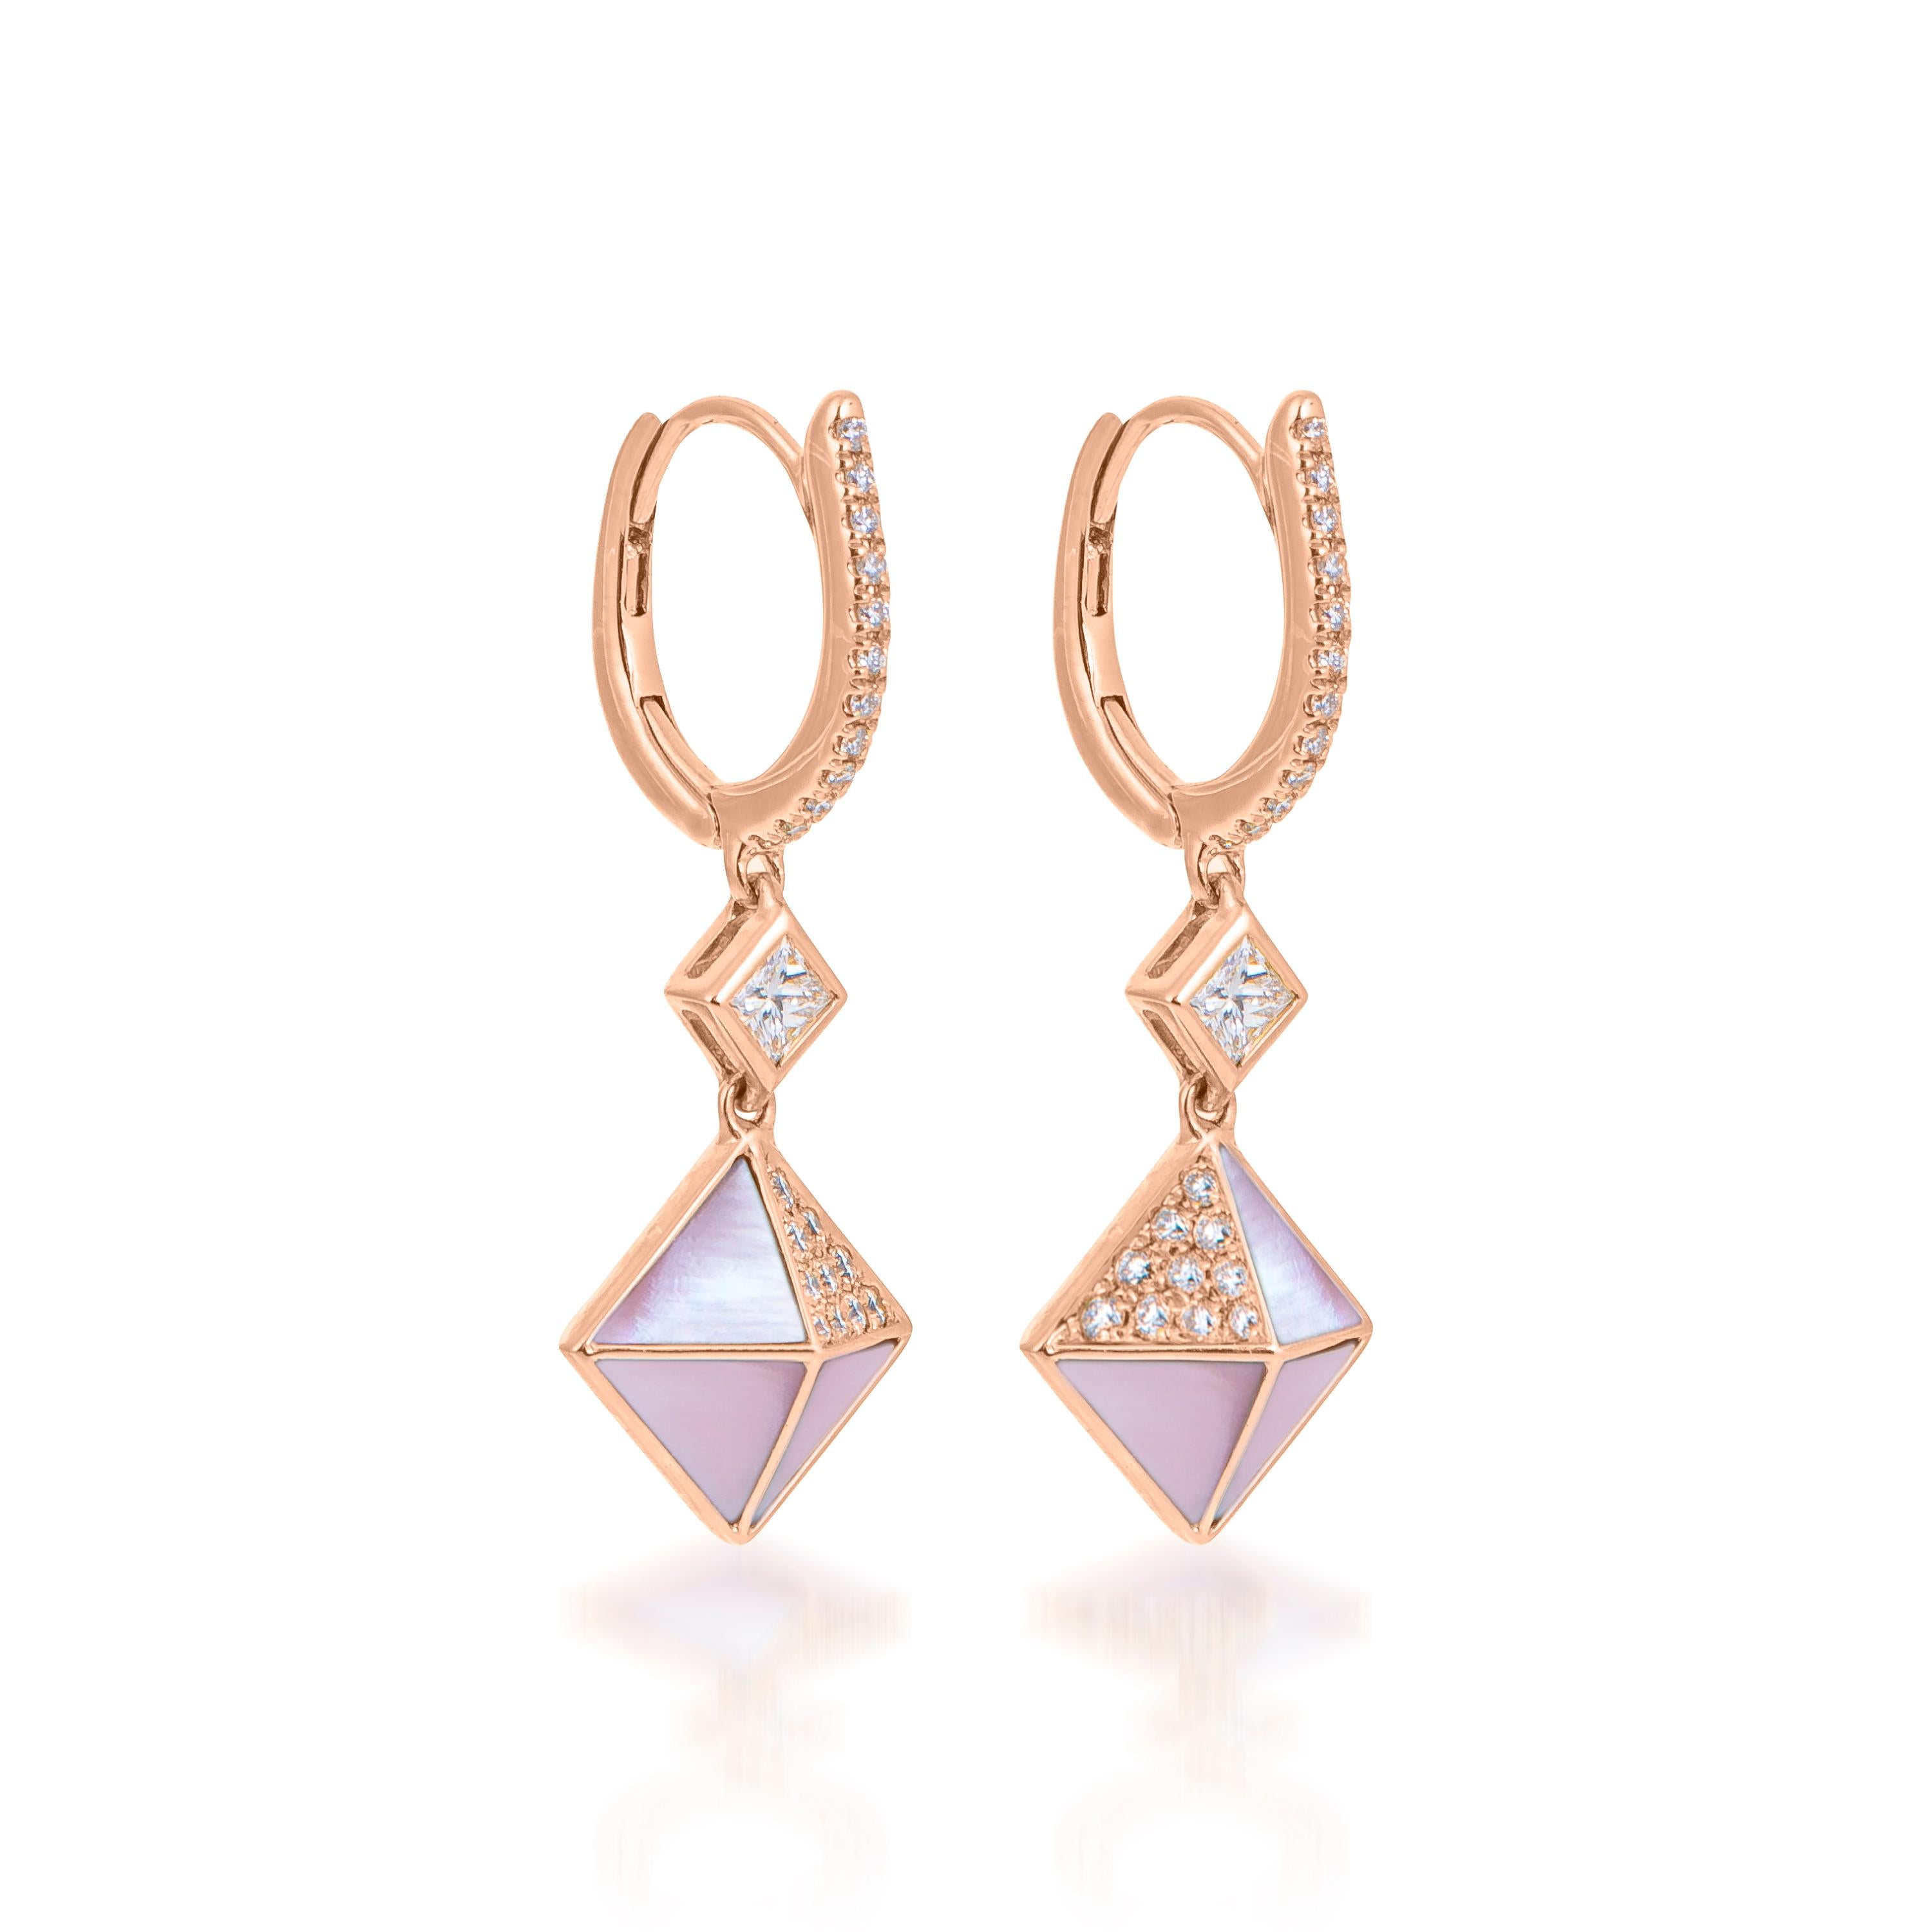 Through graphic, contemporary lines, Butani’s Tetra collection celebrates the beauty of symmetry while reimagining classic motifs of the past. 

Exuding refined elegance, the Tetra Apex Earrings are formed in velvety 18k rose gold, each set with